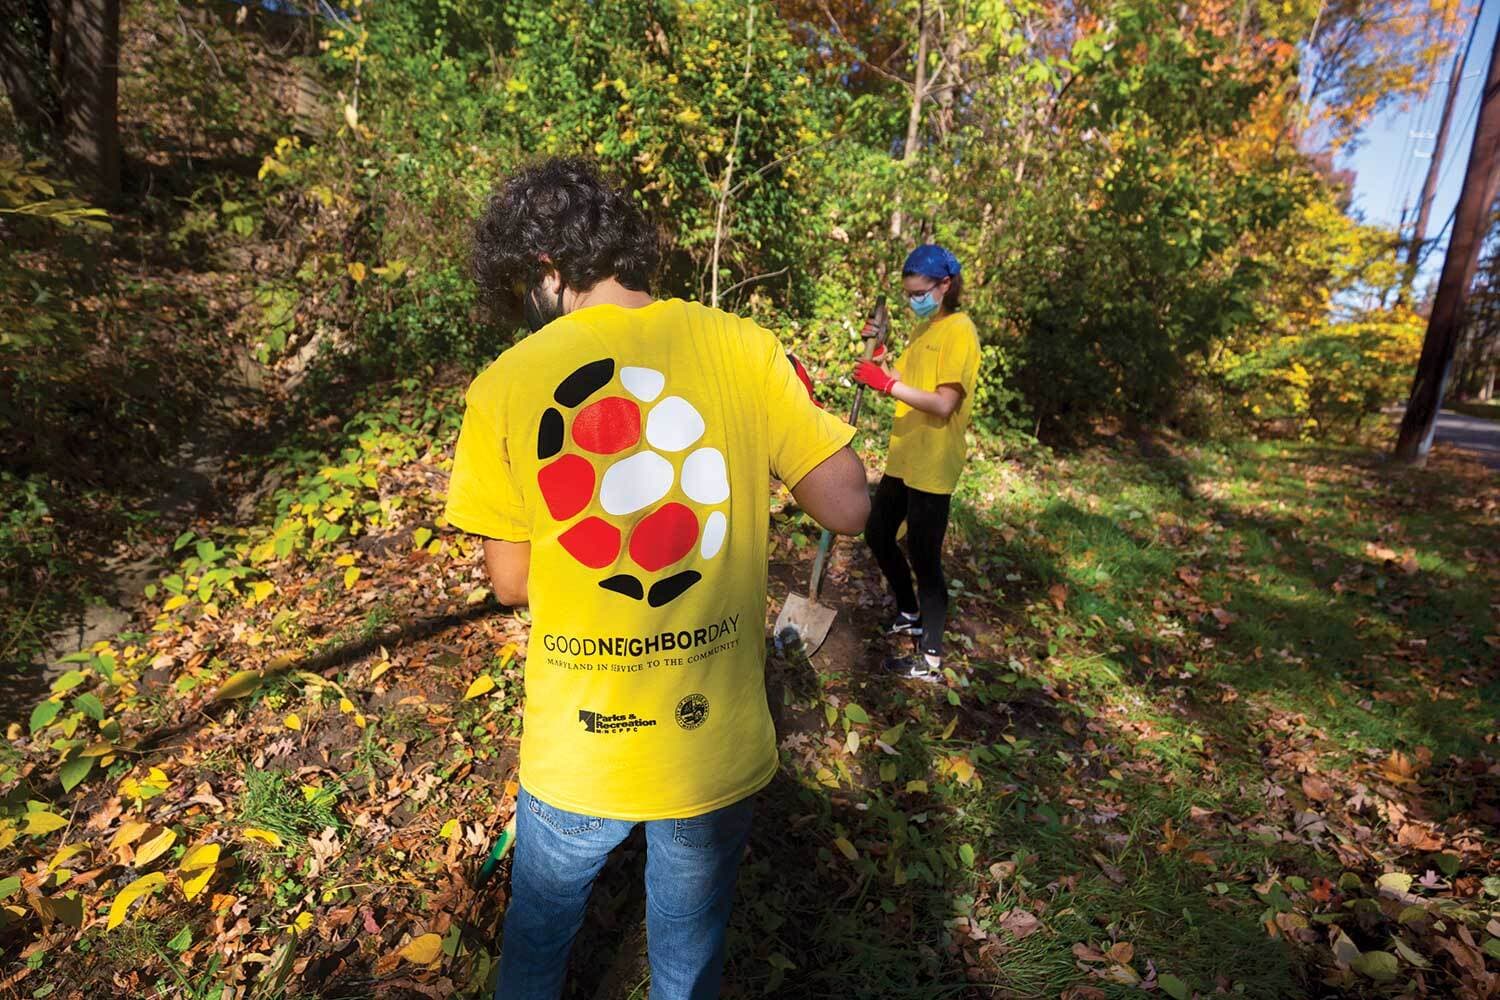 Two students wearing yellow shirts with a terrapin shell and Good Neighbor Day emblazoned on the back rake leaves in a wooded area.